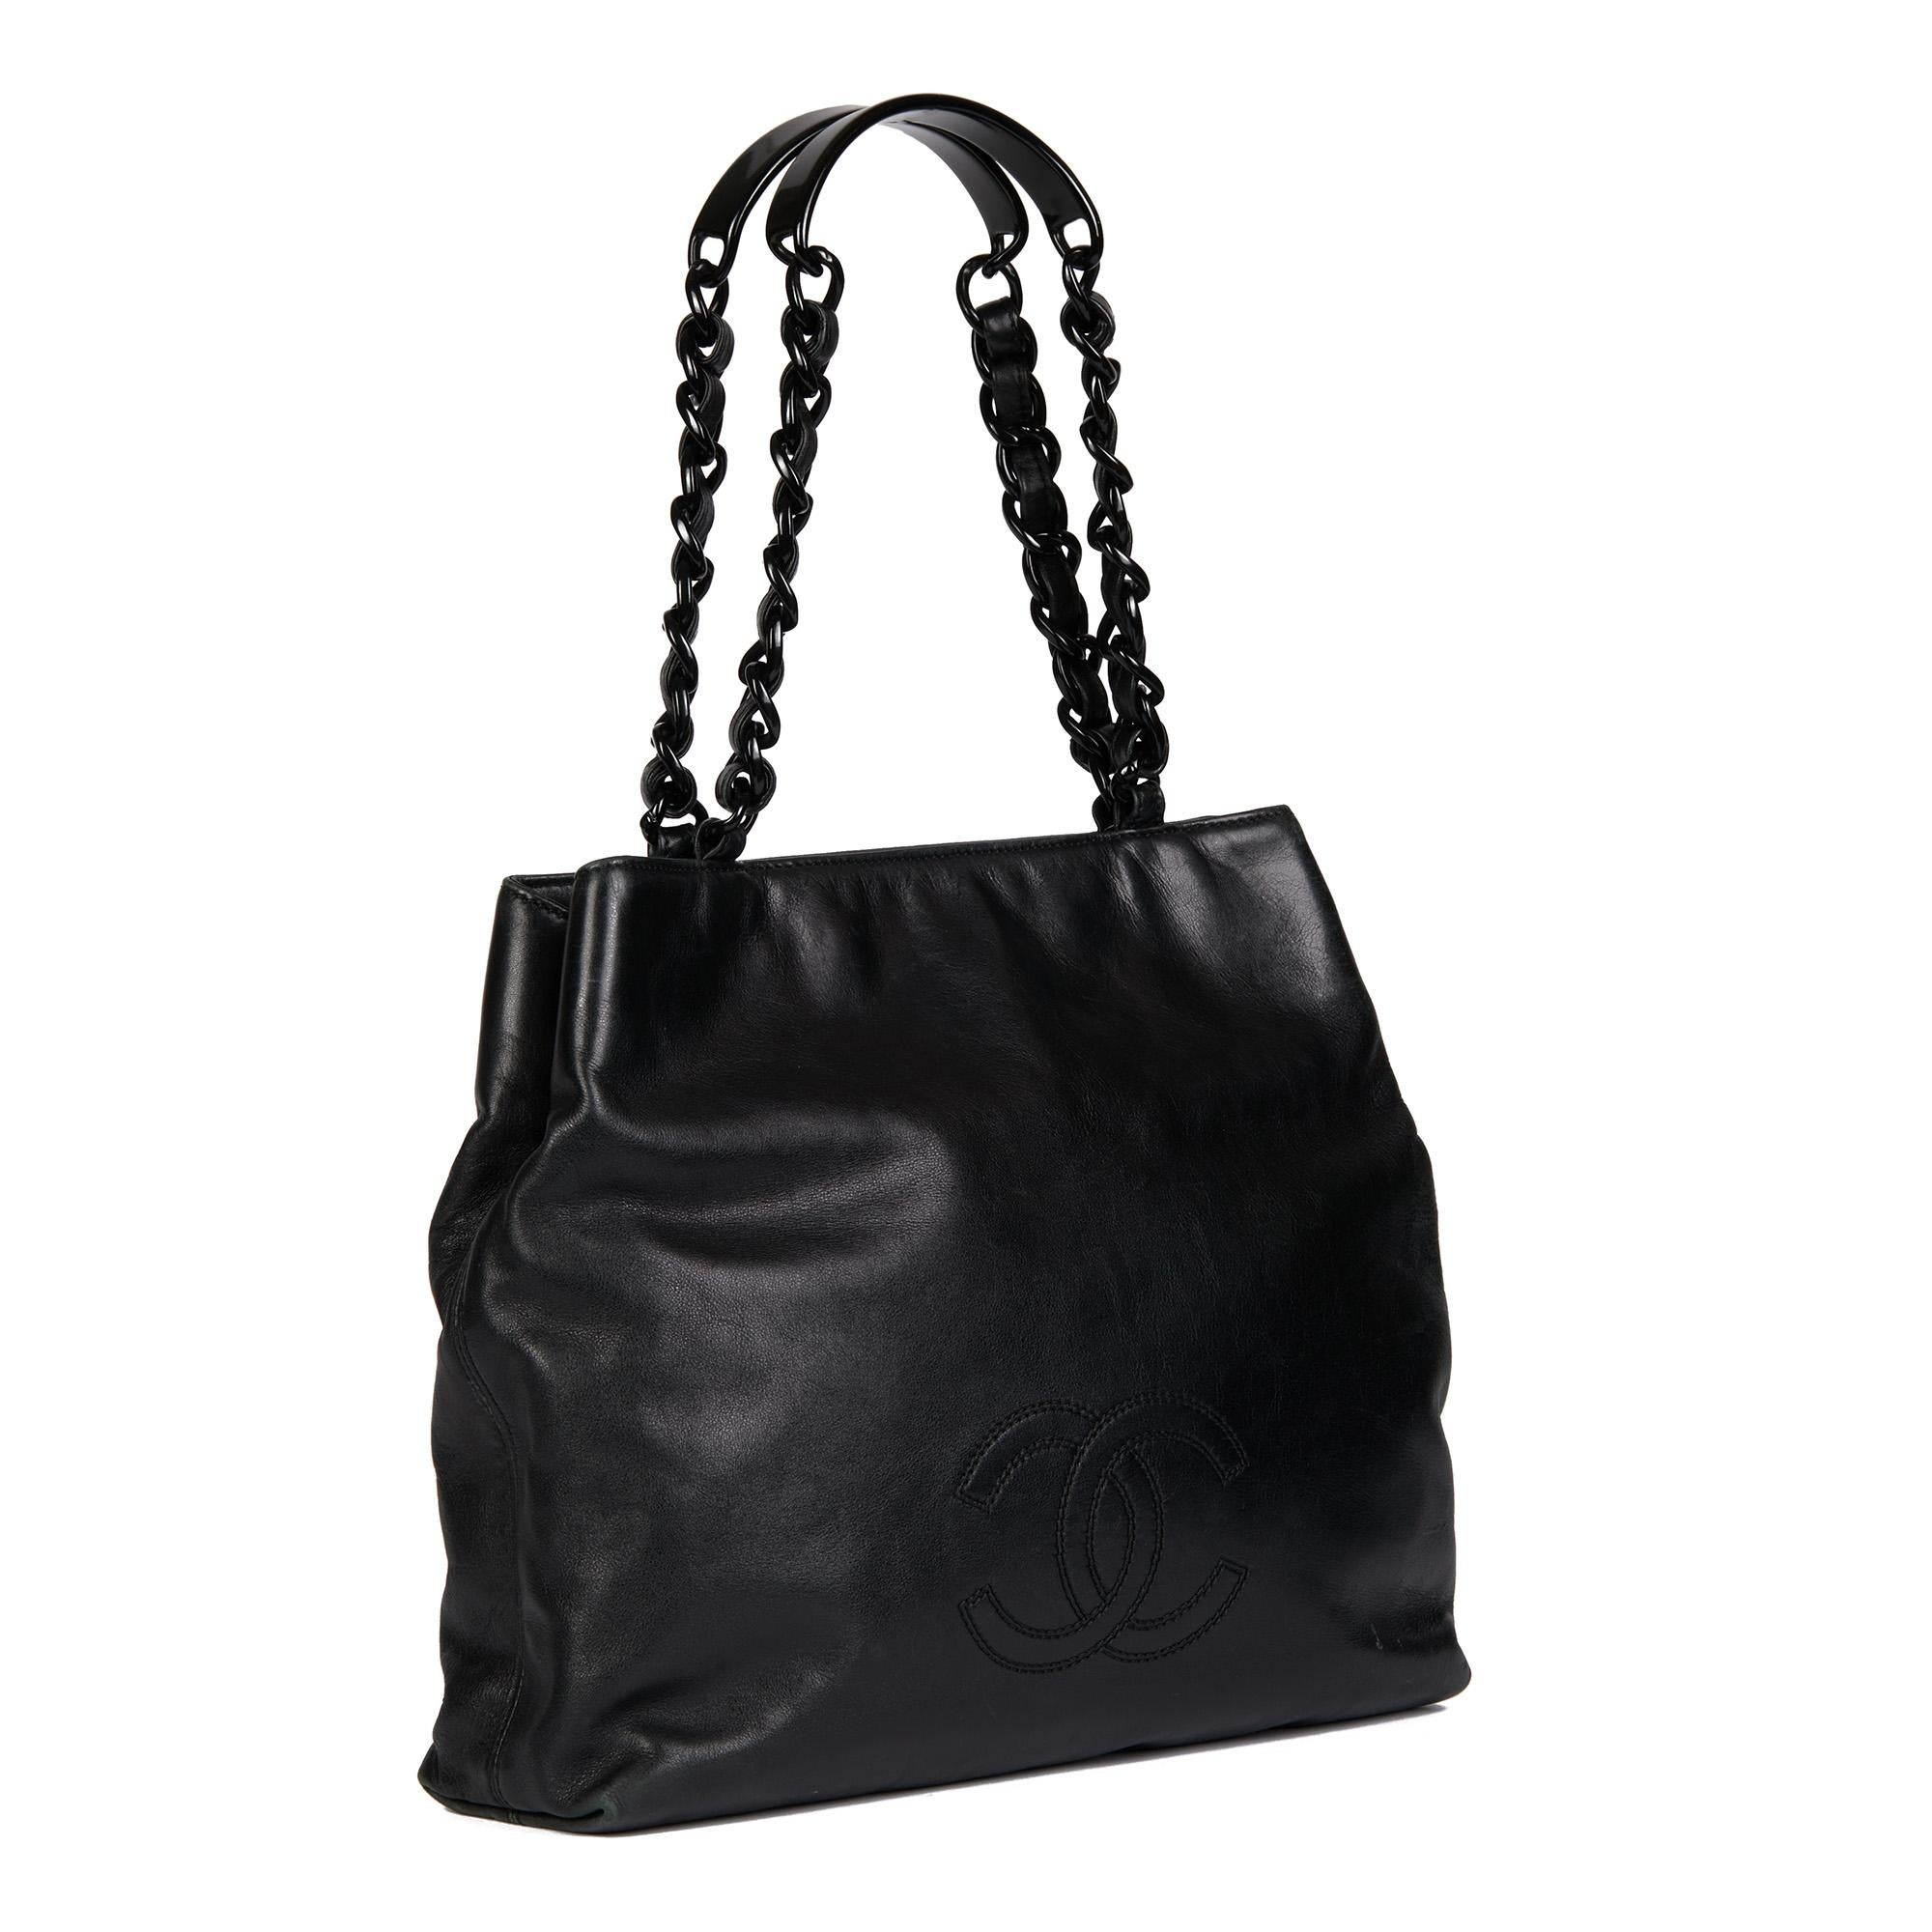 CHANEL
SO Black Calfskin Leather Vintage Timeless Shoulder Tote

Serial Number: 5582308
Age (Circa): 1997
Accompanied By: Chanel Dust Bag, Authenticity Card
Authenticity Details: Authenticity Card, Serial Sticker (Made in Italy)
Gender: Ladies
Type: